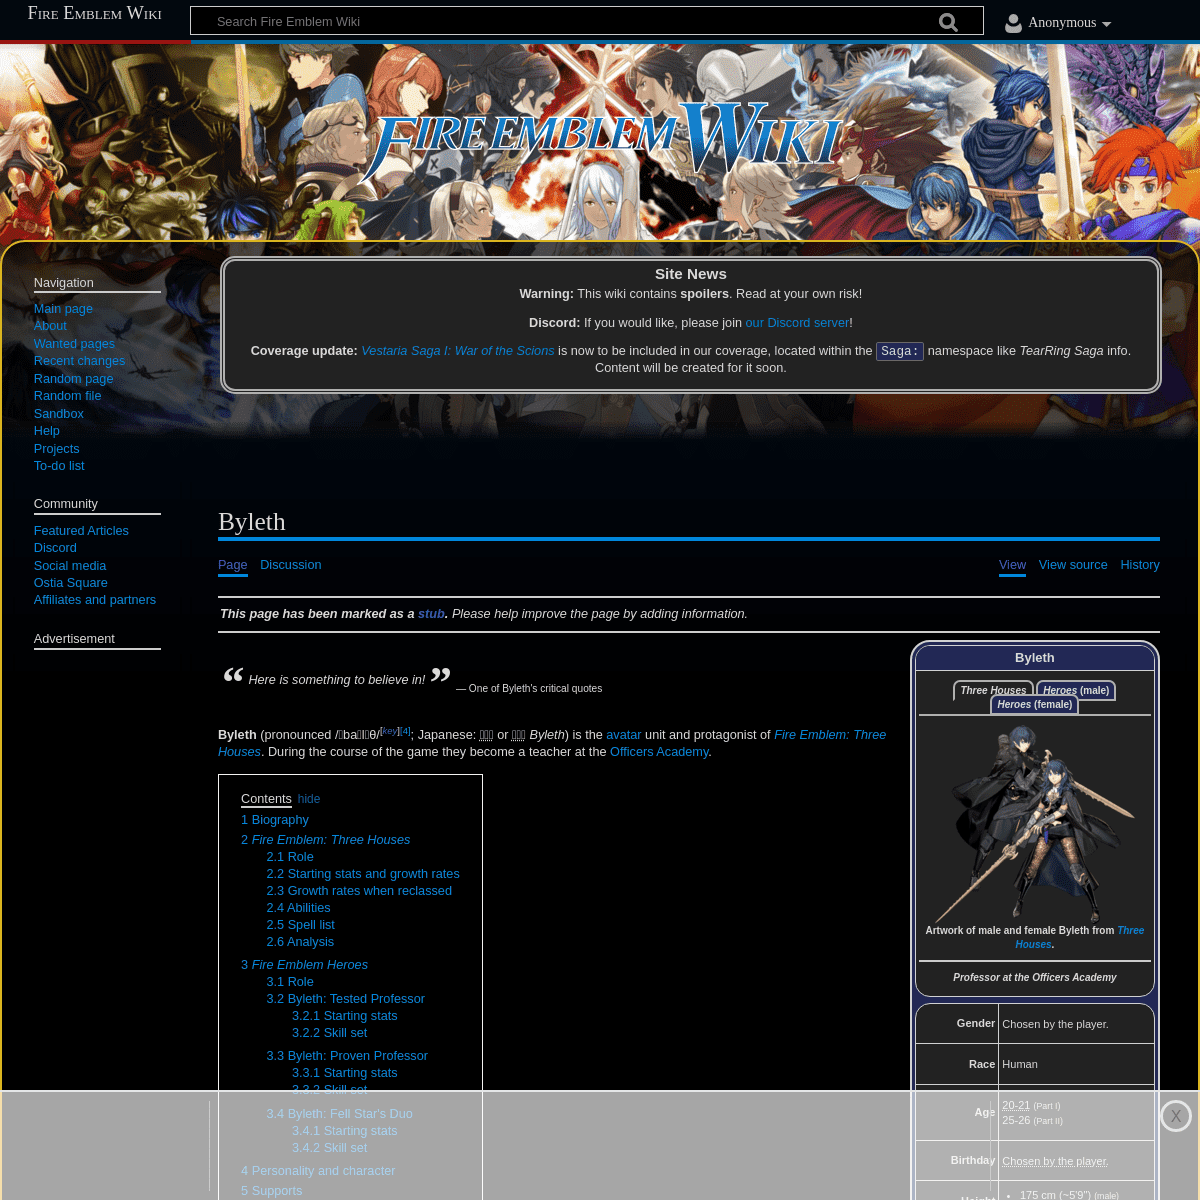 A complete backup of https://fireemblemwiki.org/wiki/Byleth